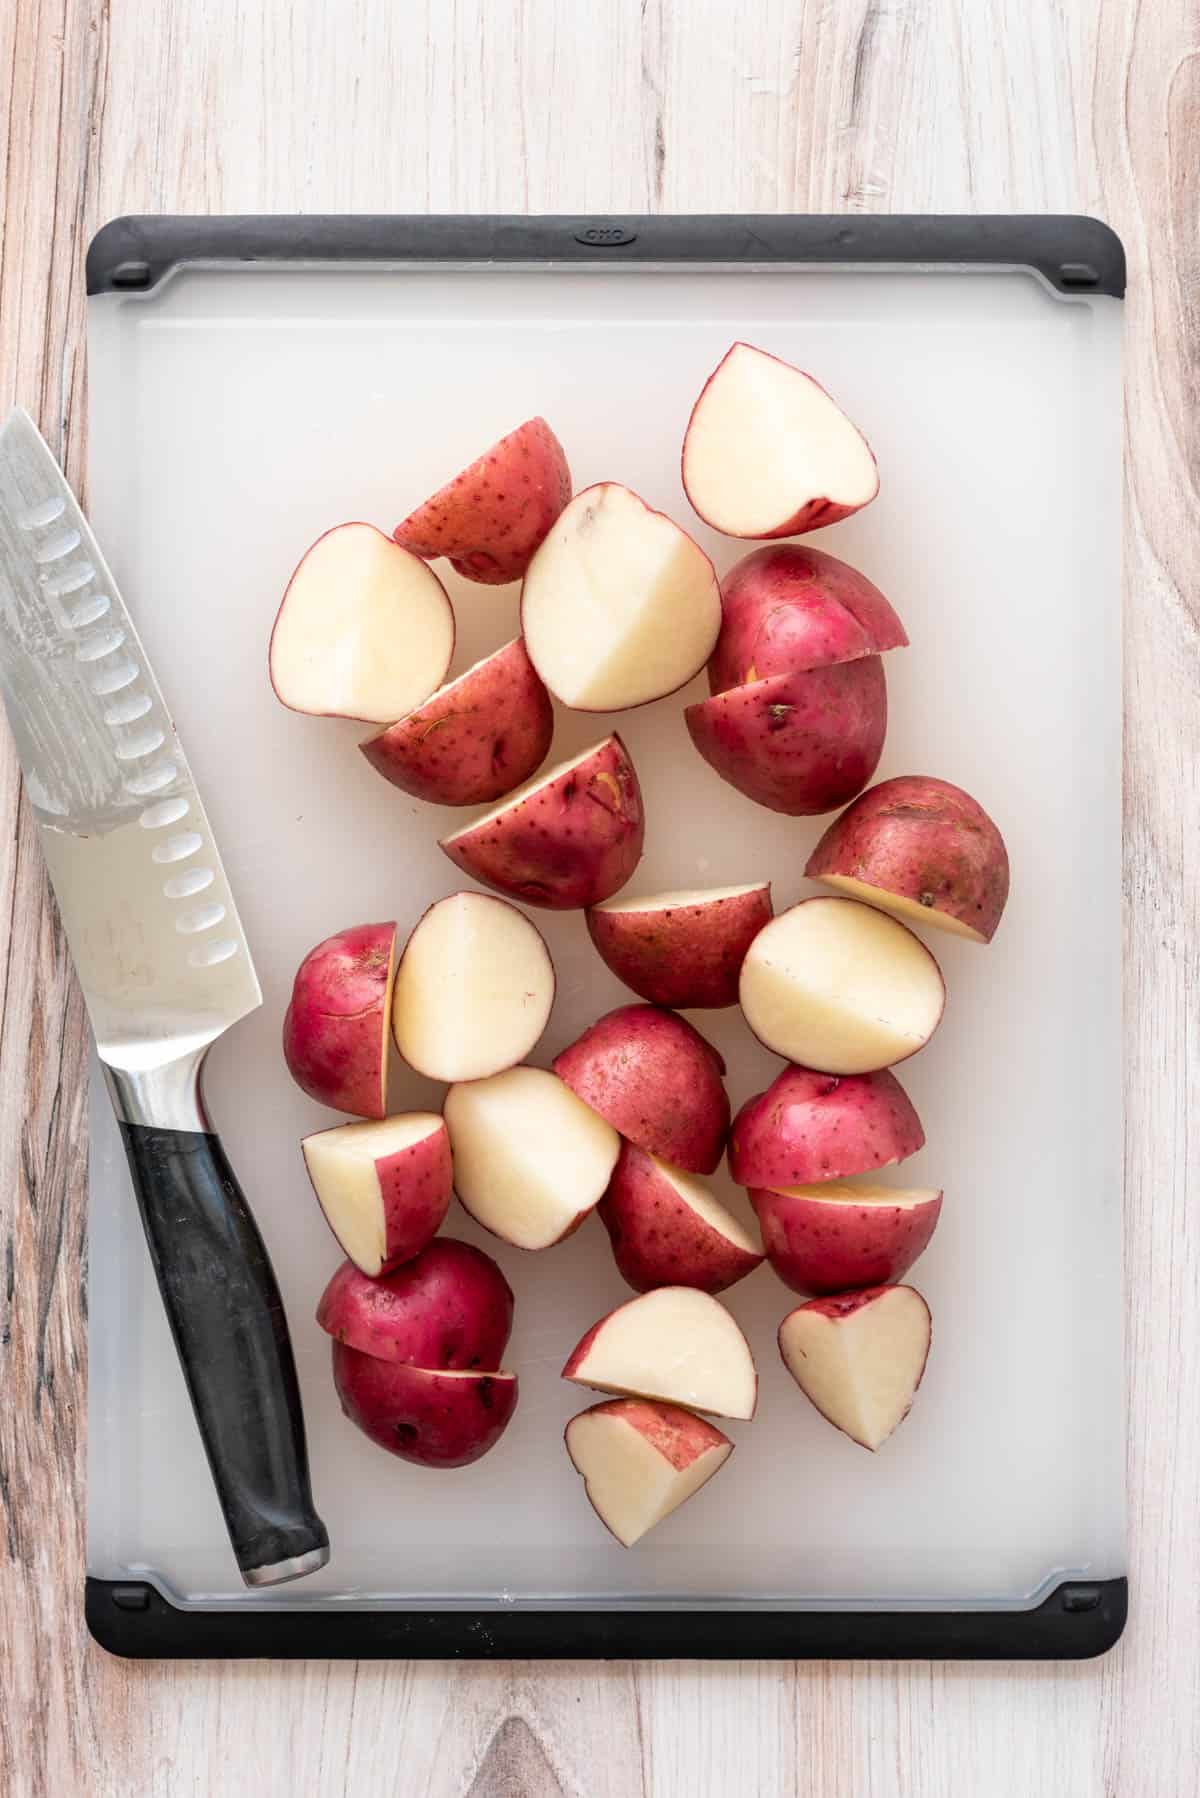 Halved and quartered red potatoes on a cutting board with a knife.